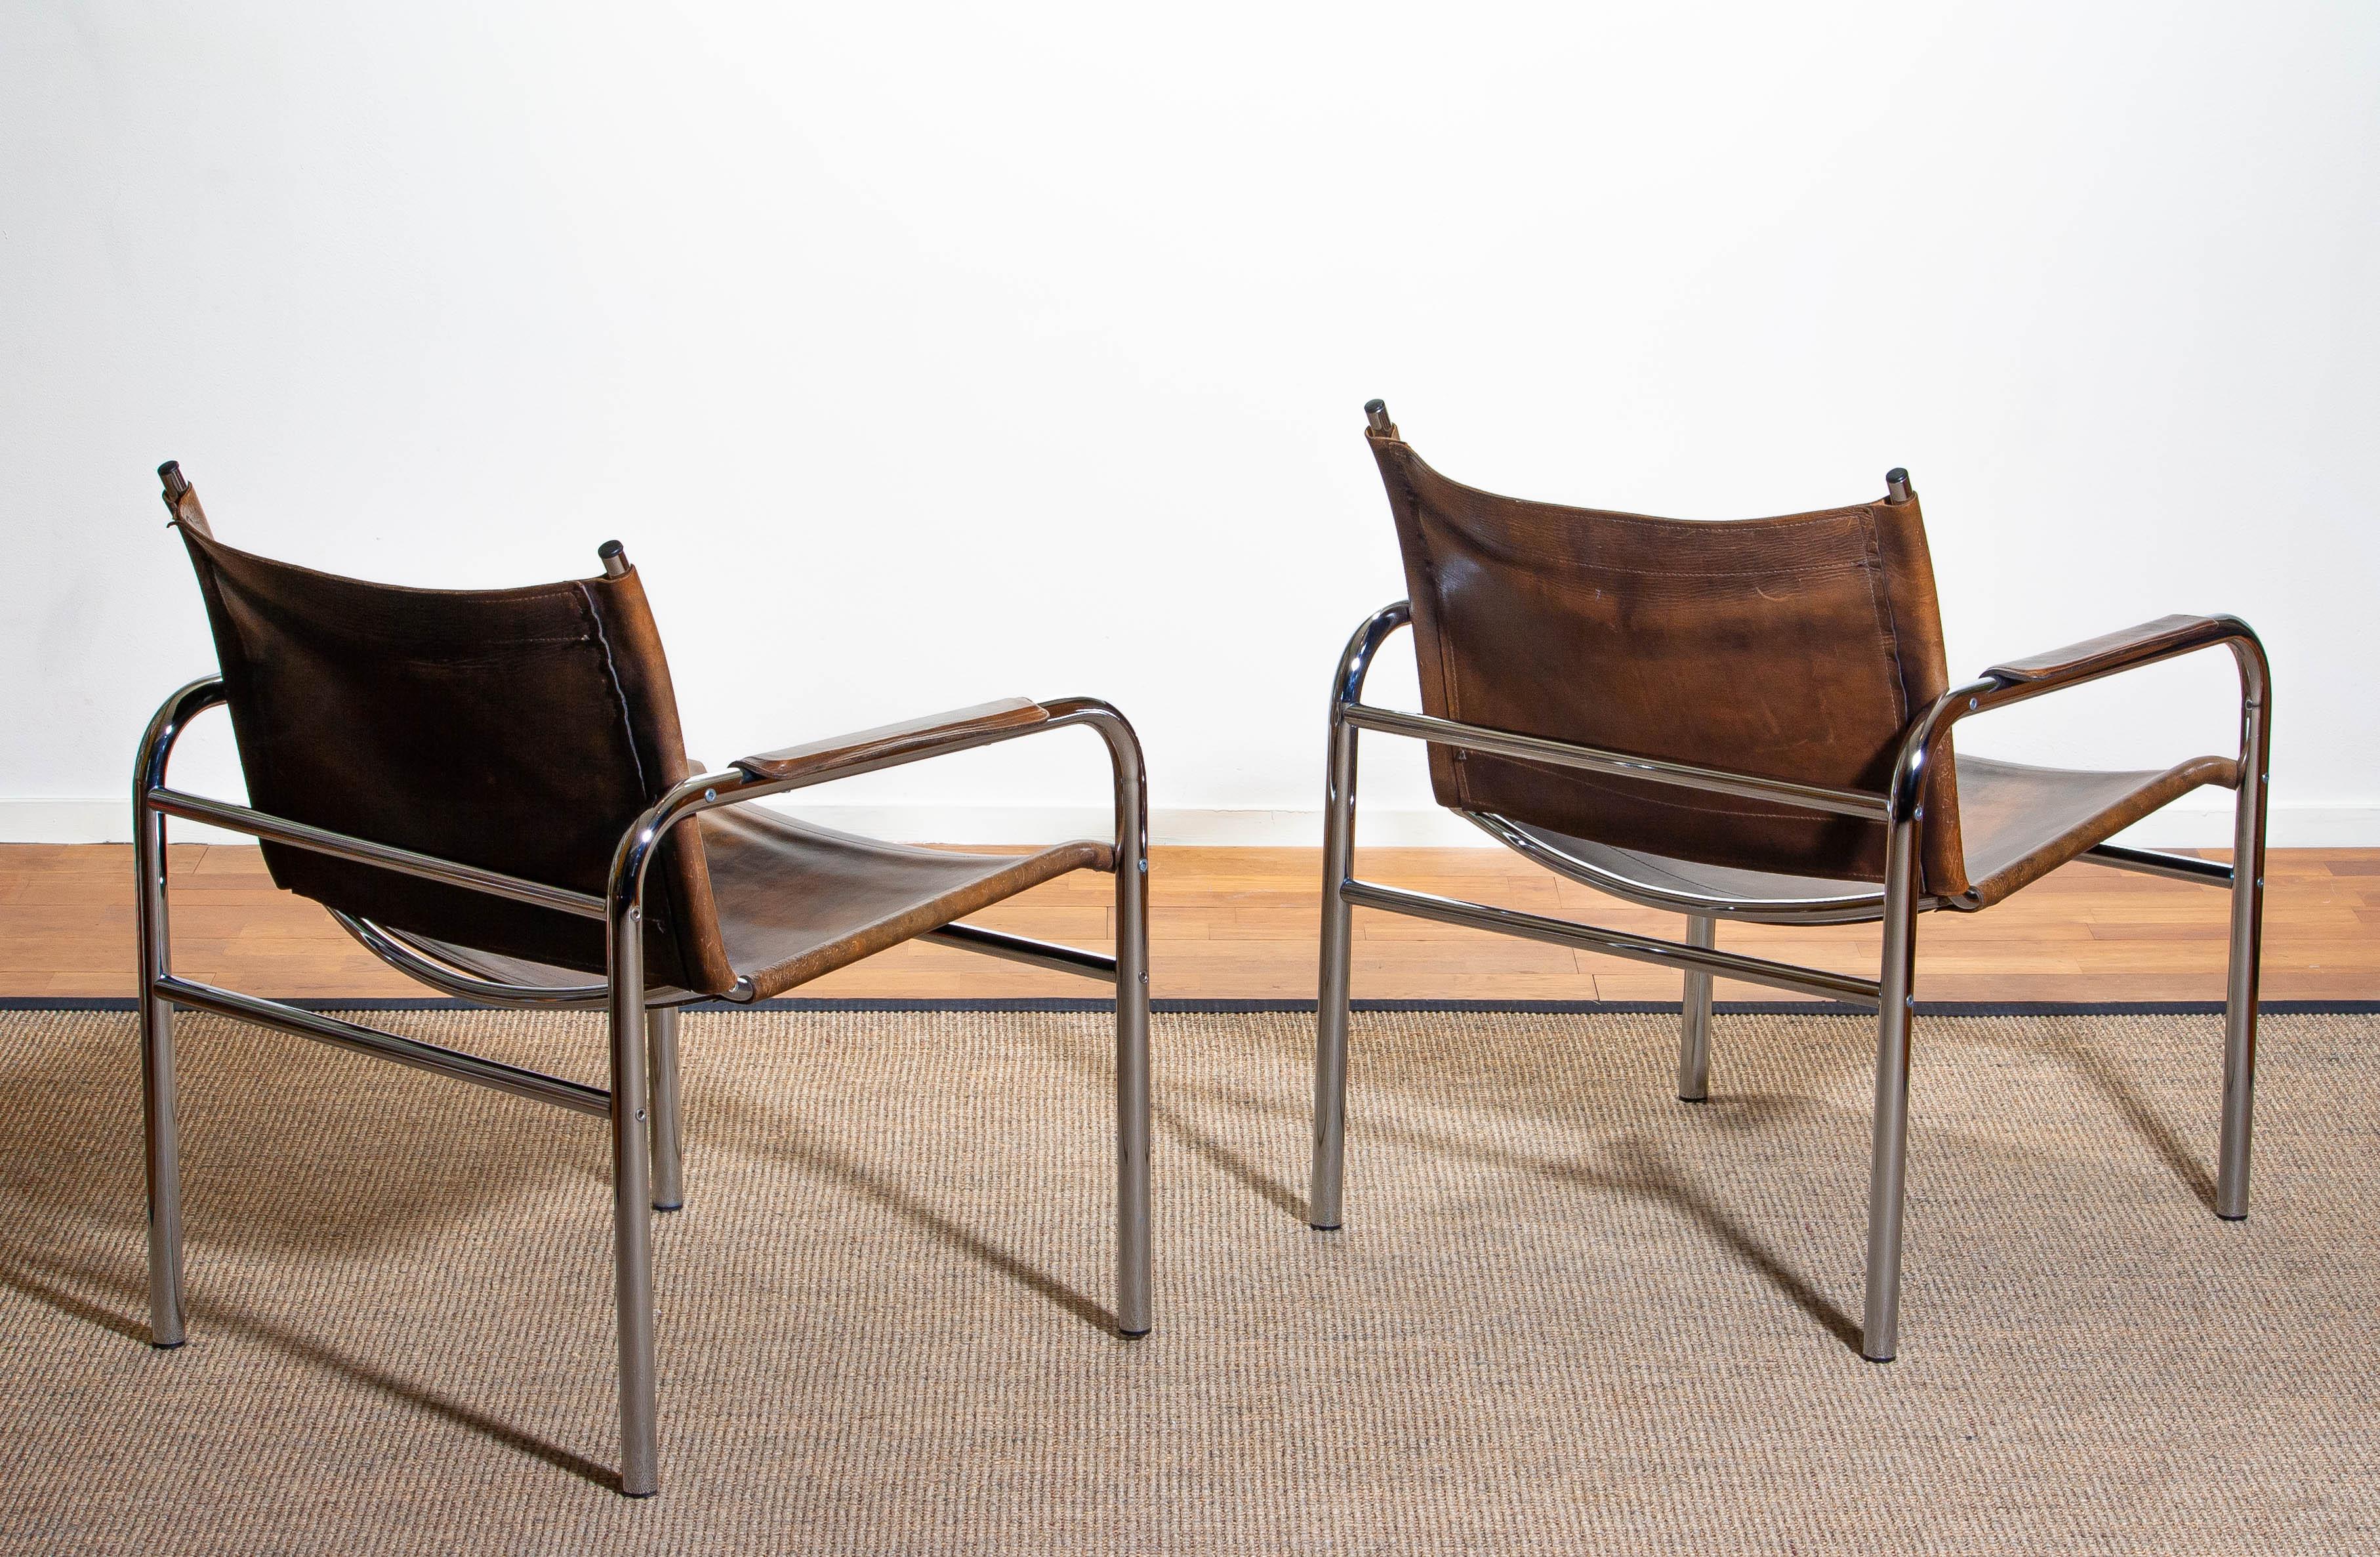 Late 20th Century 1980s, Pair of Leather and Tubular Steel Armchairs by Tord Bjorklund, Sweden